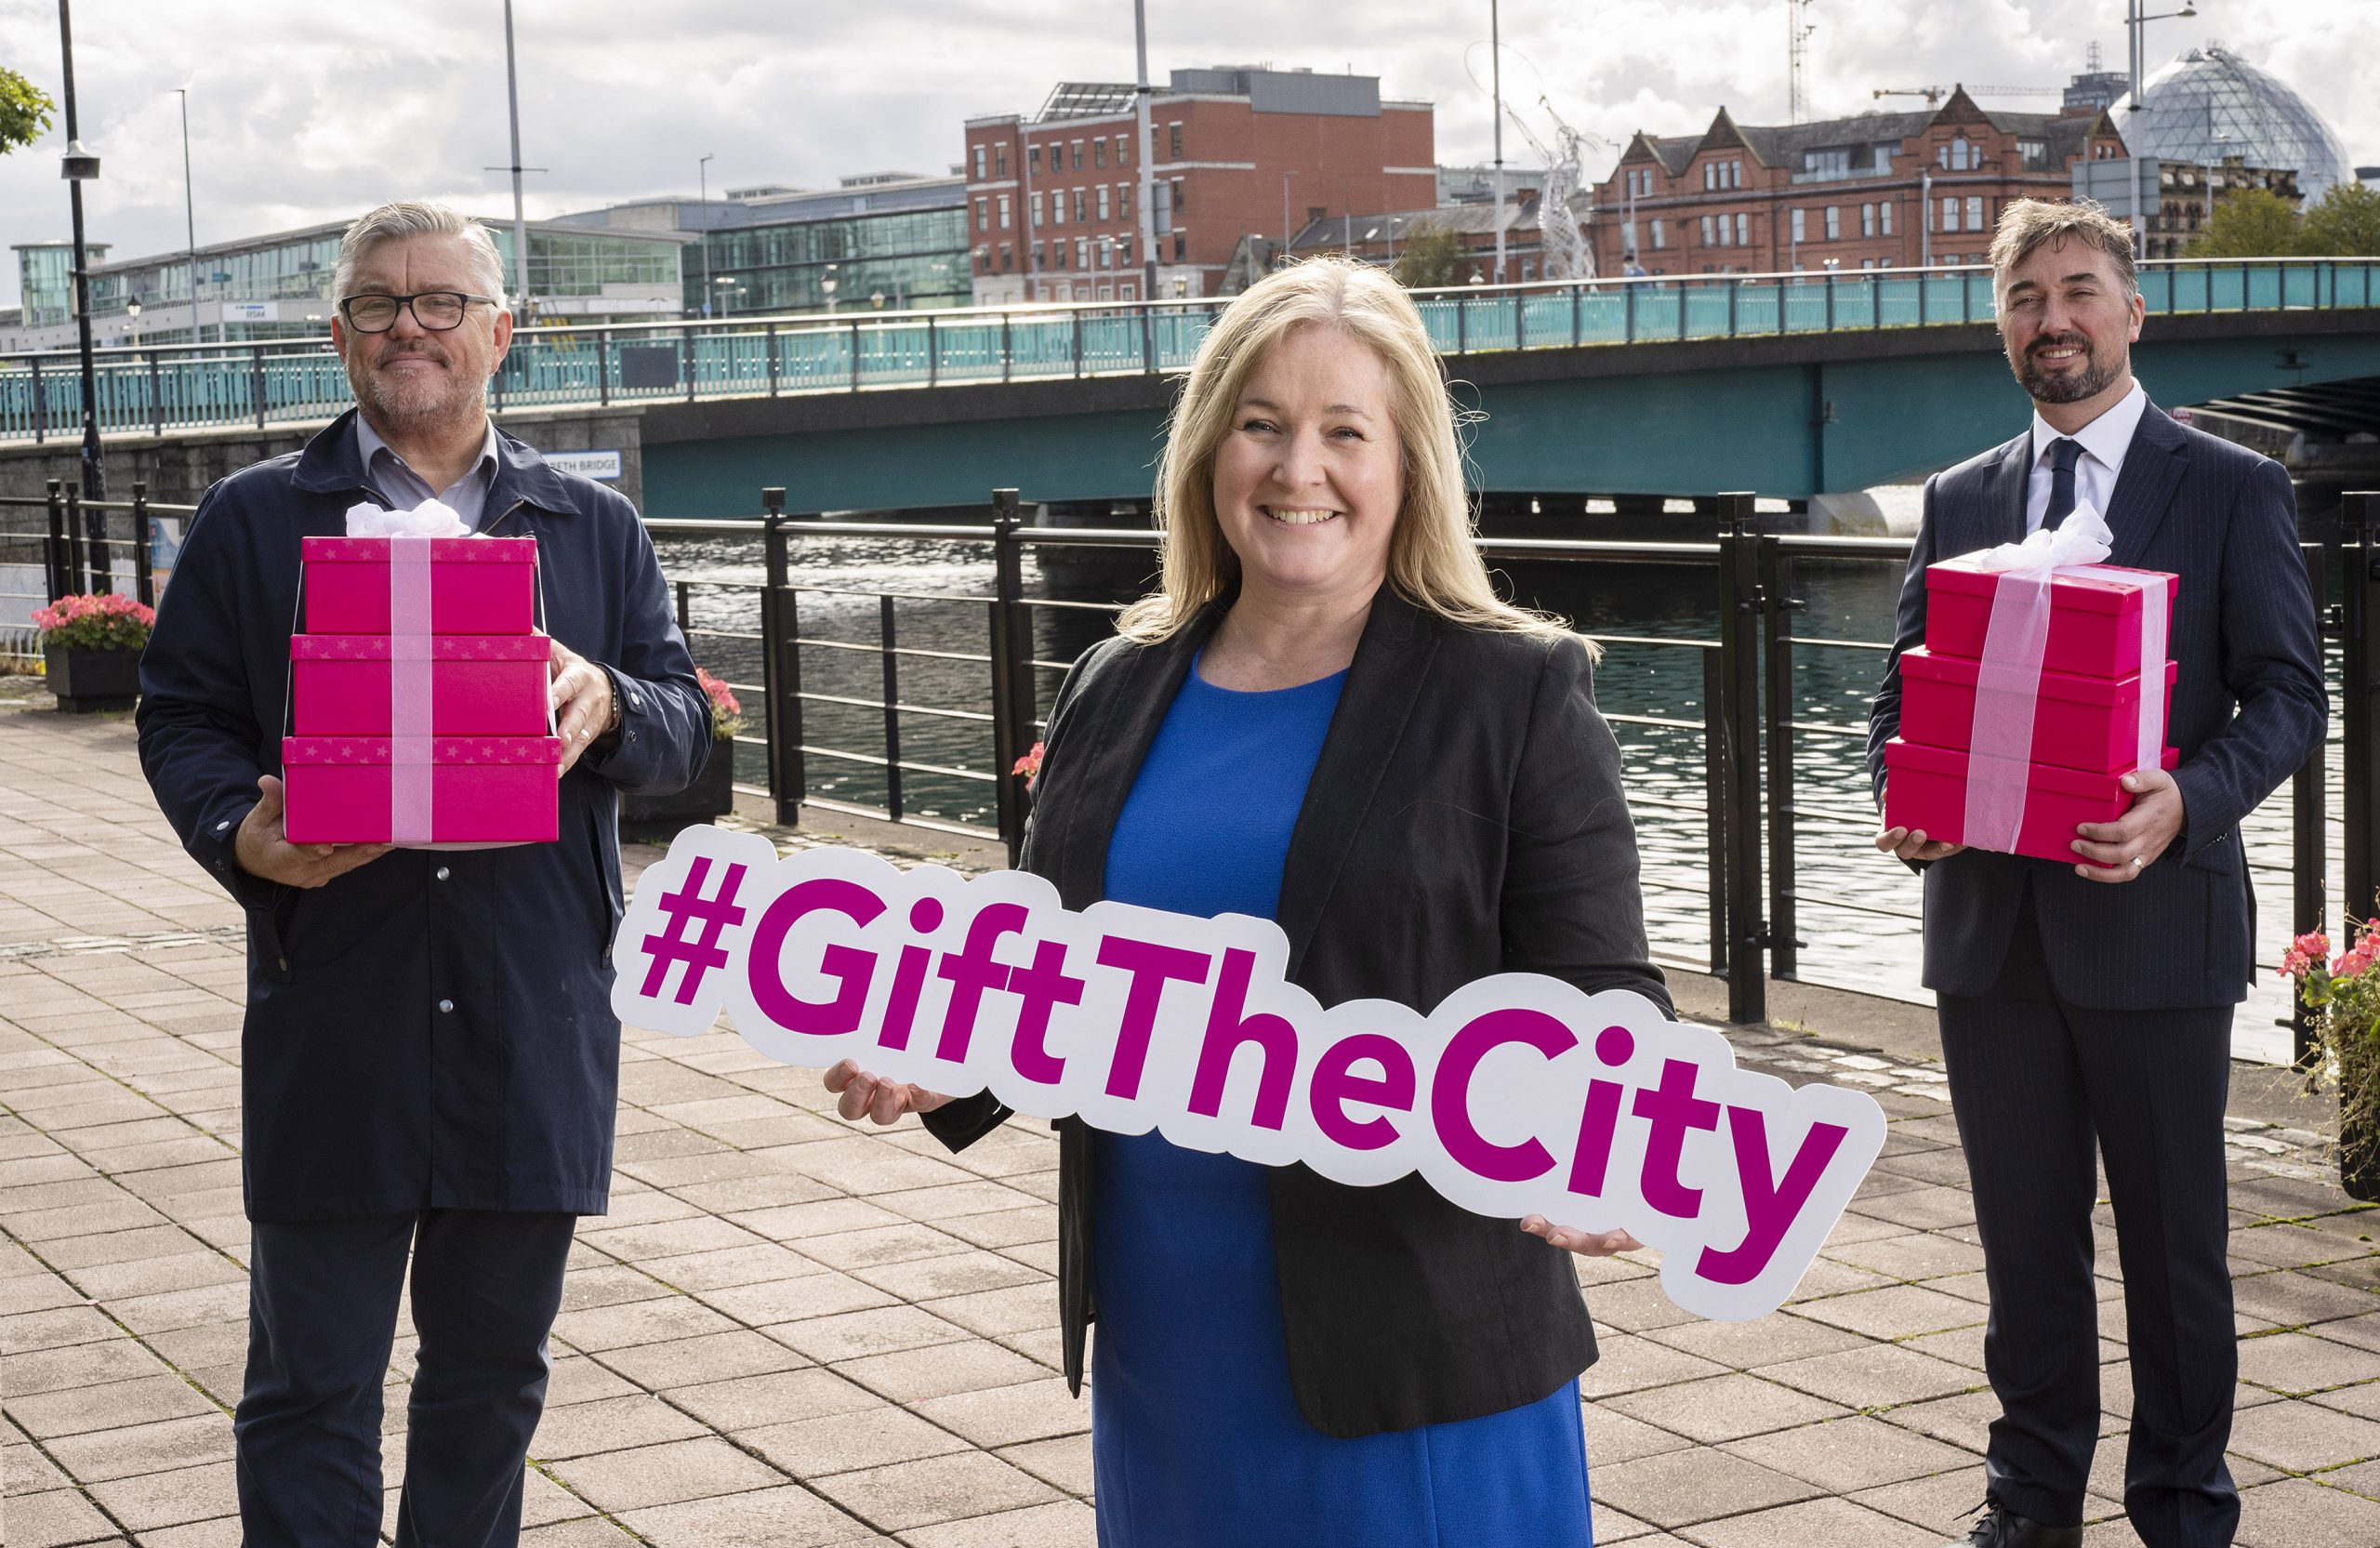 Gifting gets technical – Local retailers using tech to drive economic recovery